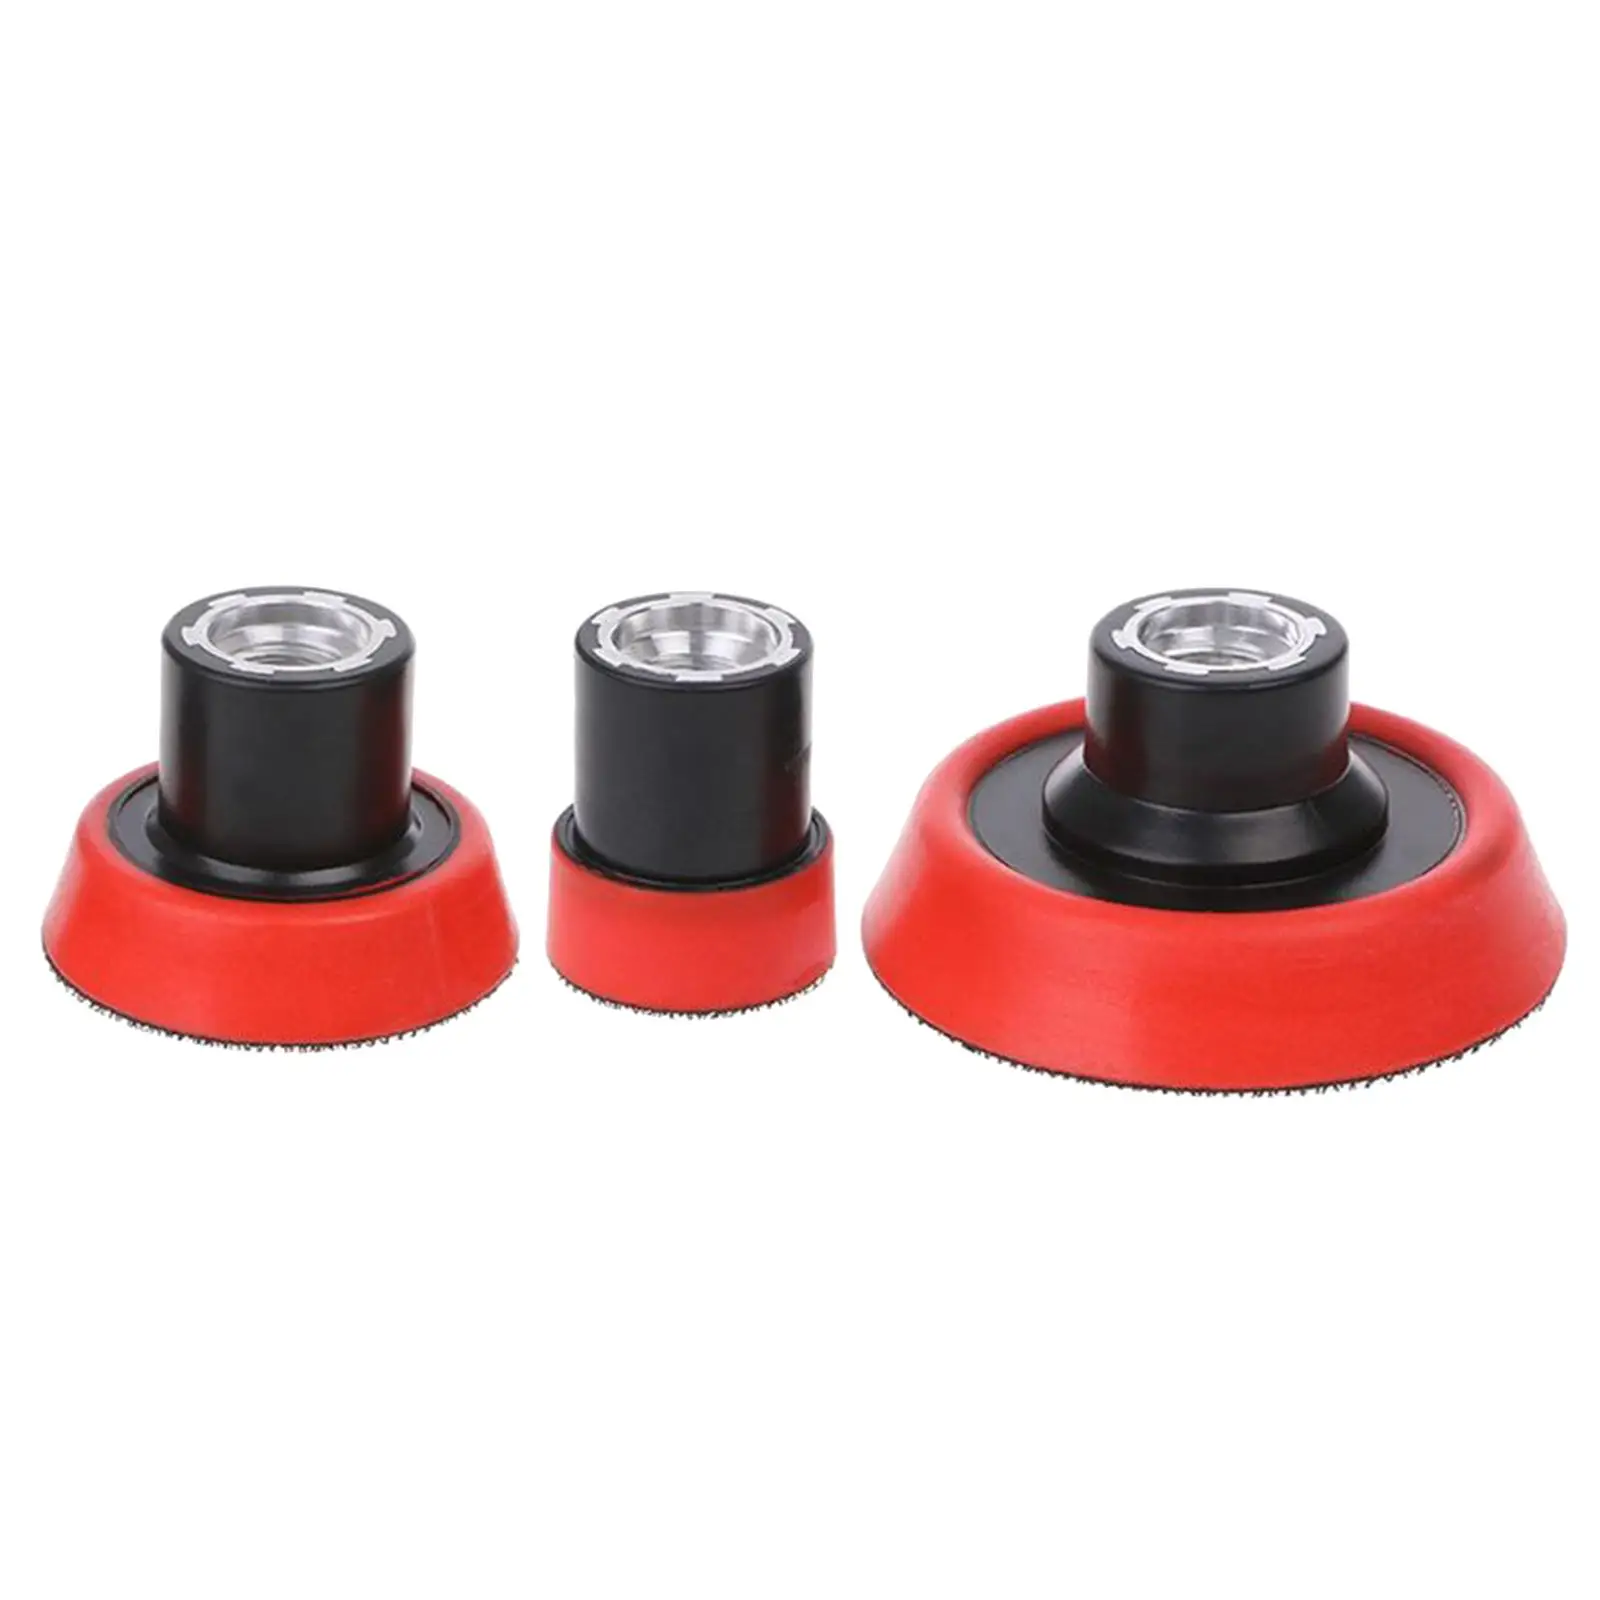 3 Pieces Backing Plate Accessories Backer Set Durable Tools M14 Polisher Angle Grinder for Polishing Car Care Detailing Car Wash